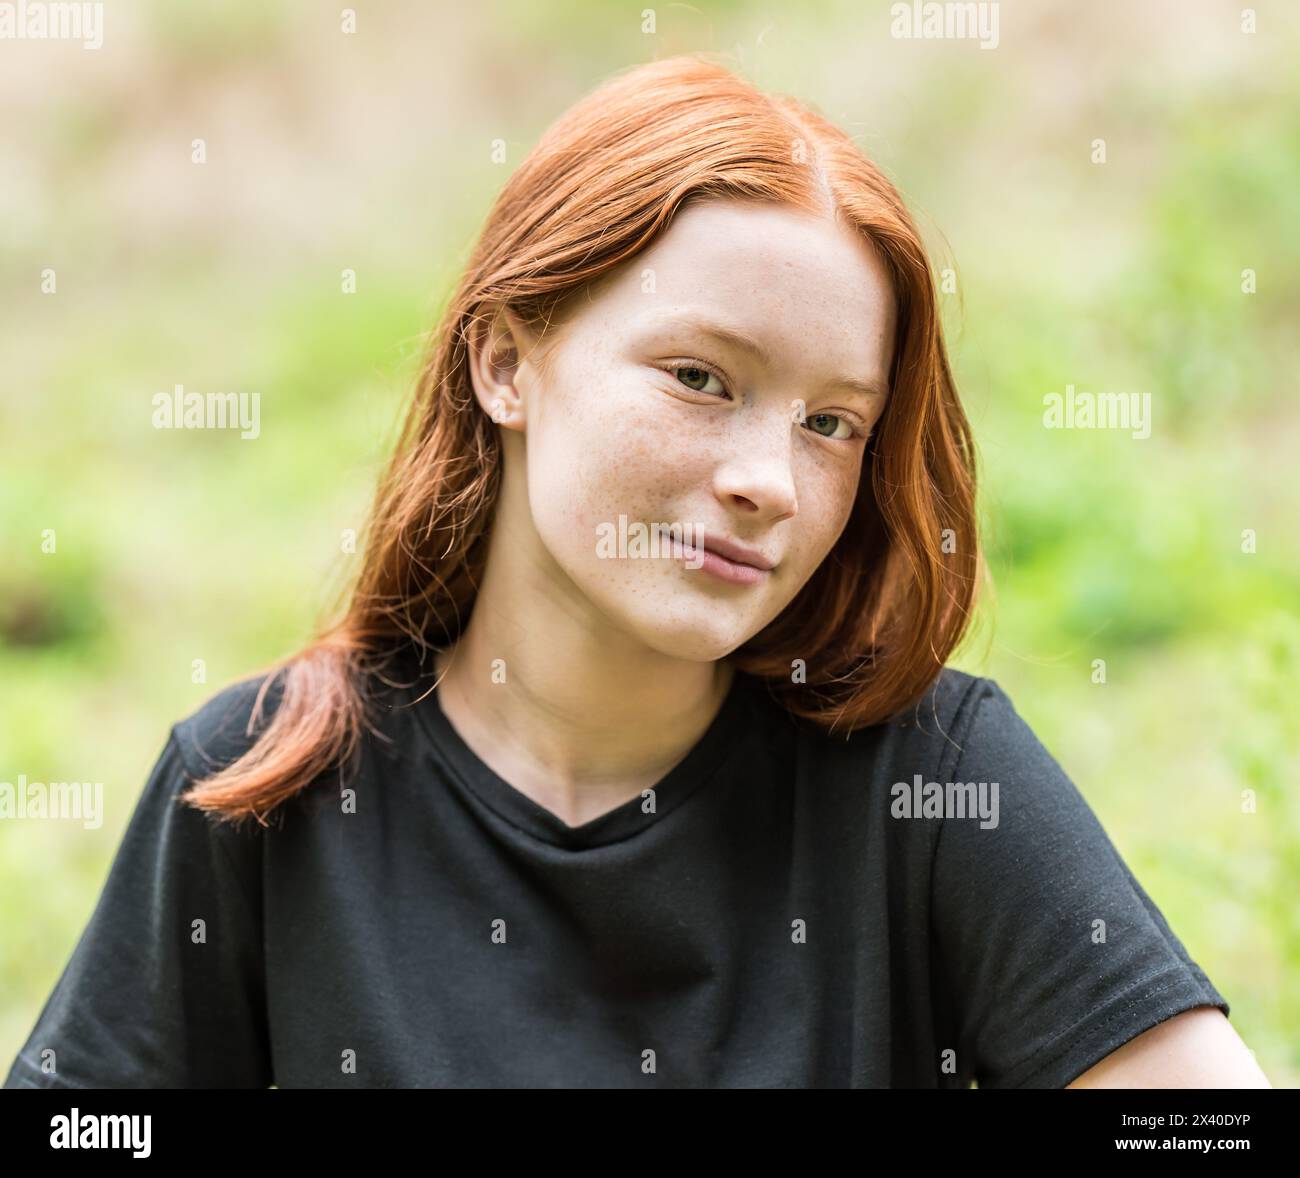 Red haired twelve year old girl with freckles posing with a nature bokeh background. Model released. Stock Photo